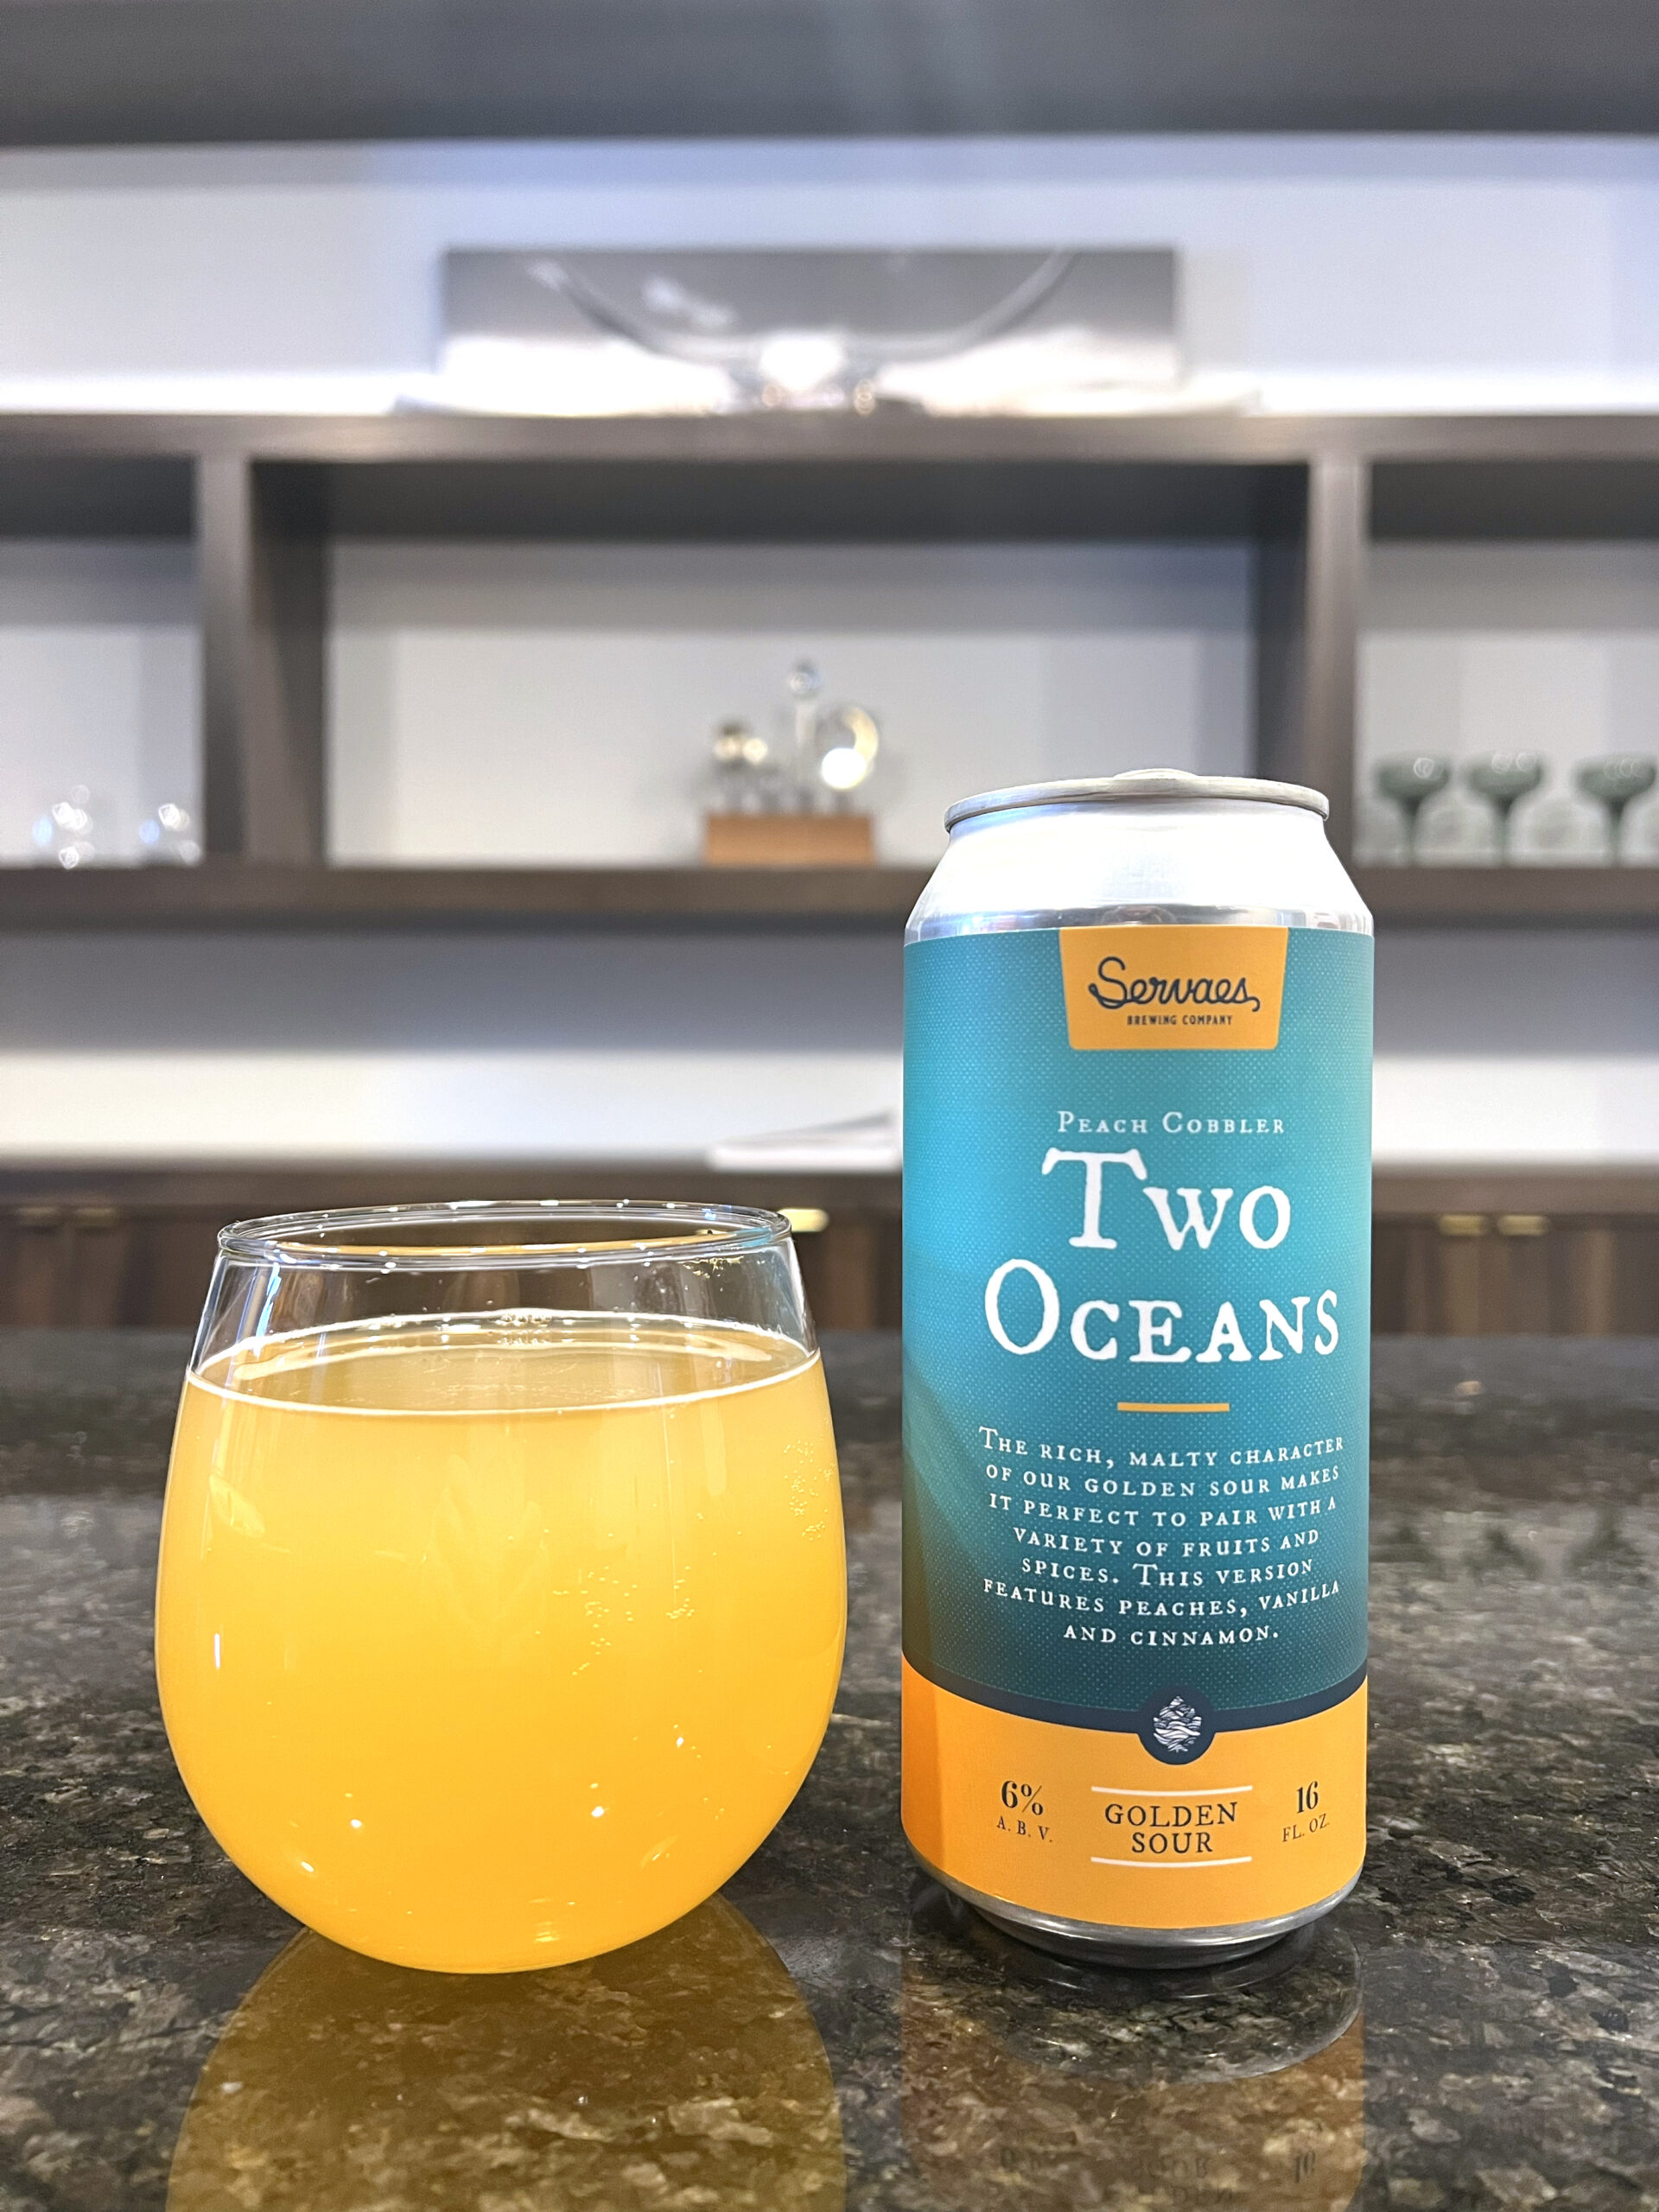 Two Oceans Craft Beer from Servaes Brewing Company